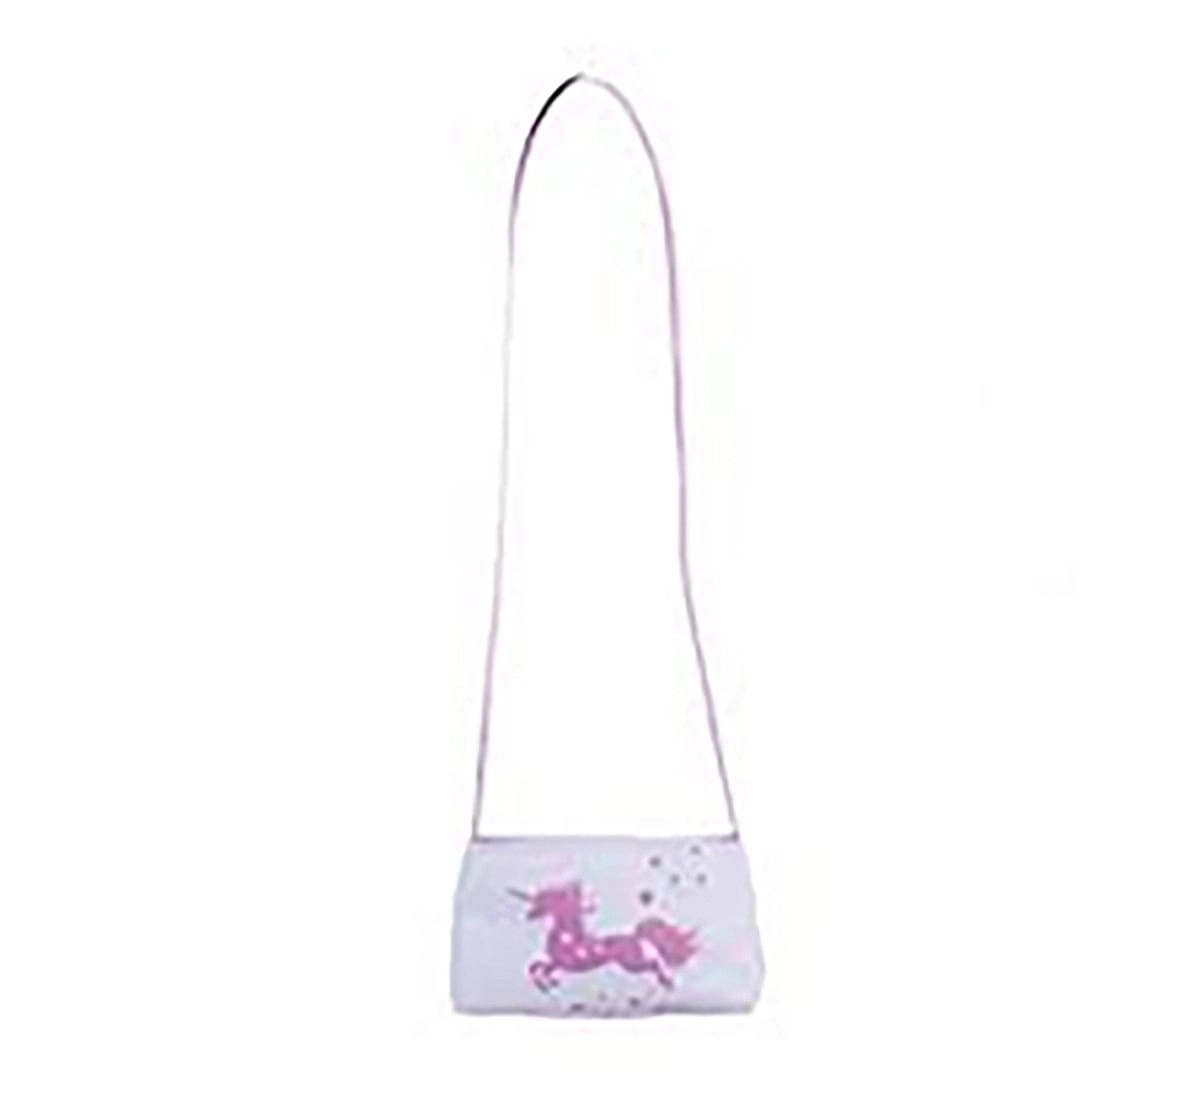  Luvely Unicorn Shoulder Bag-Lilac Accessories  age 3Y+ 